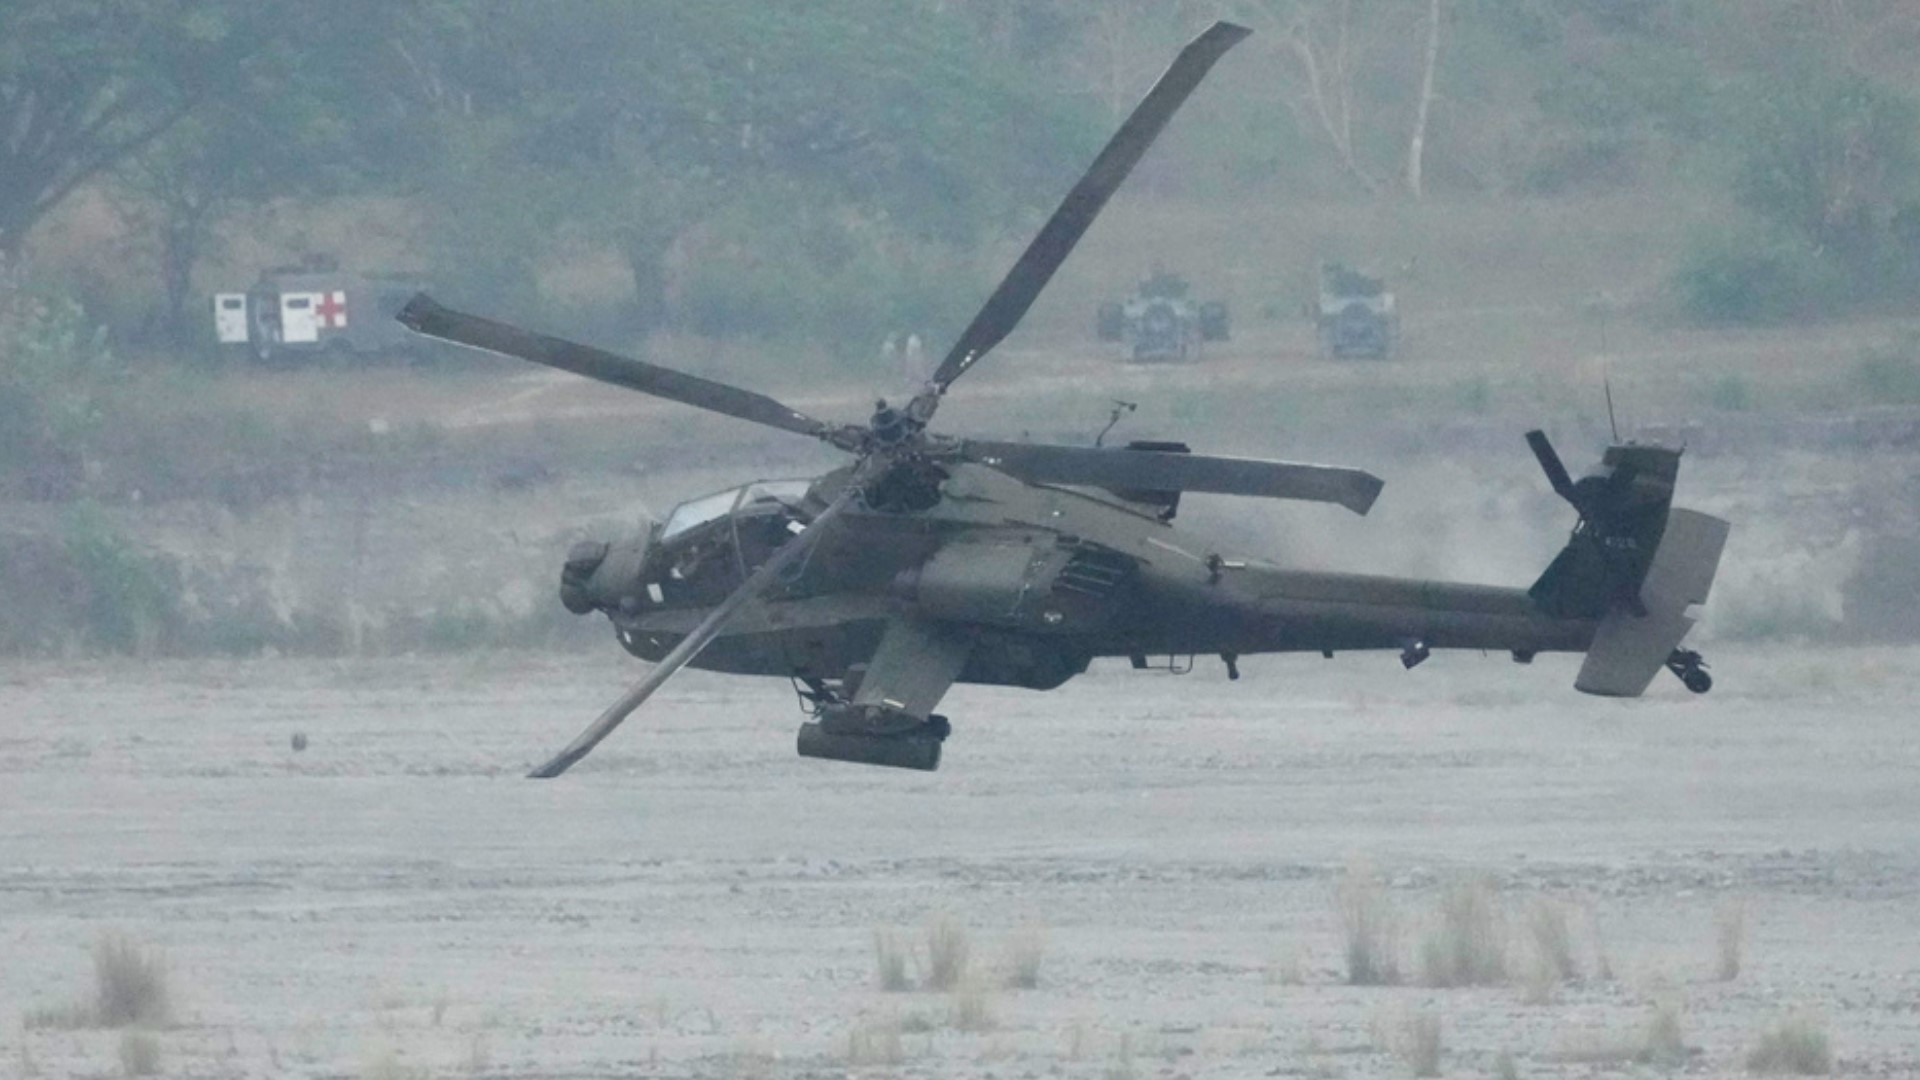 Two U.S. army helicopters collided and crashed Thursday in Alaska while returning from a training flight, killing three soldiers and injuring a fourth.